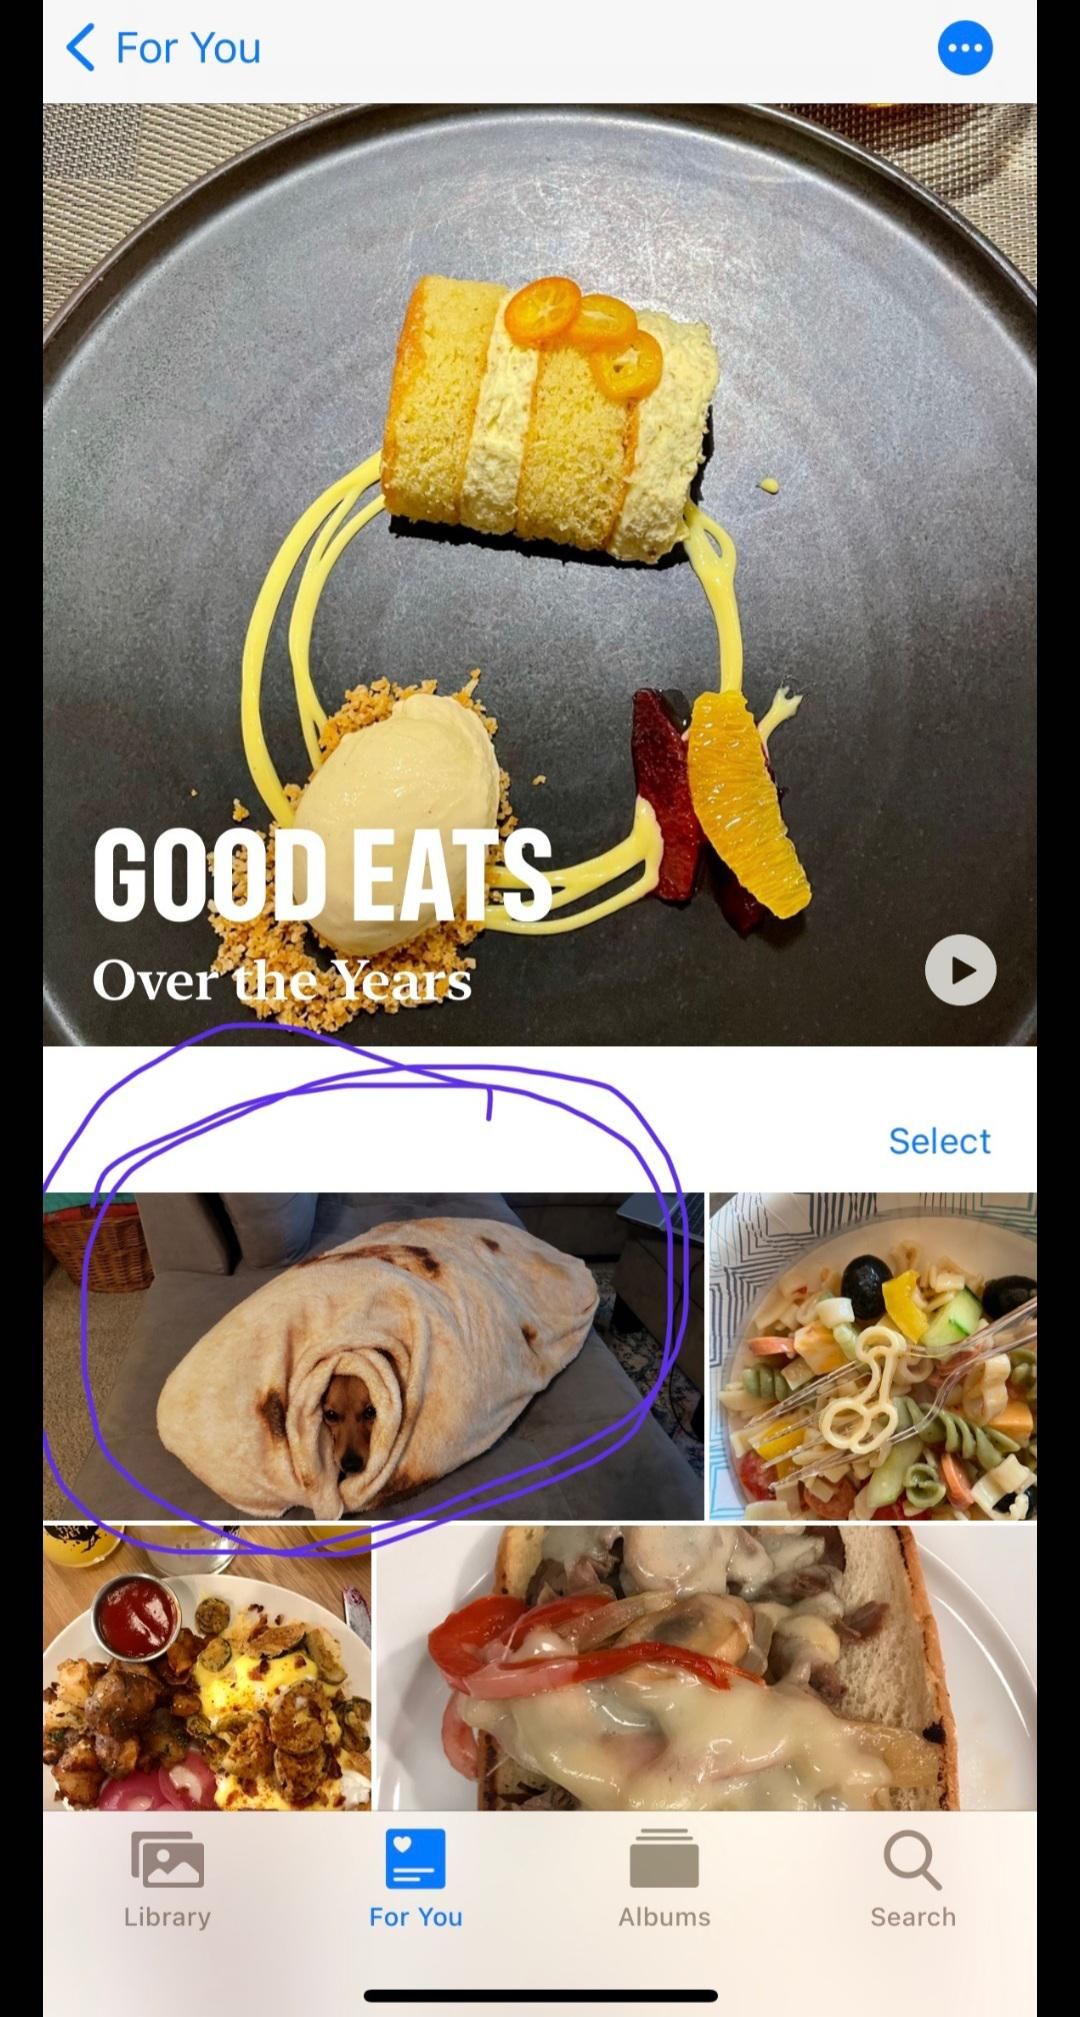 my phone created a "good eats" album and it included my dog wrapped in a tortilla blanket